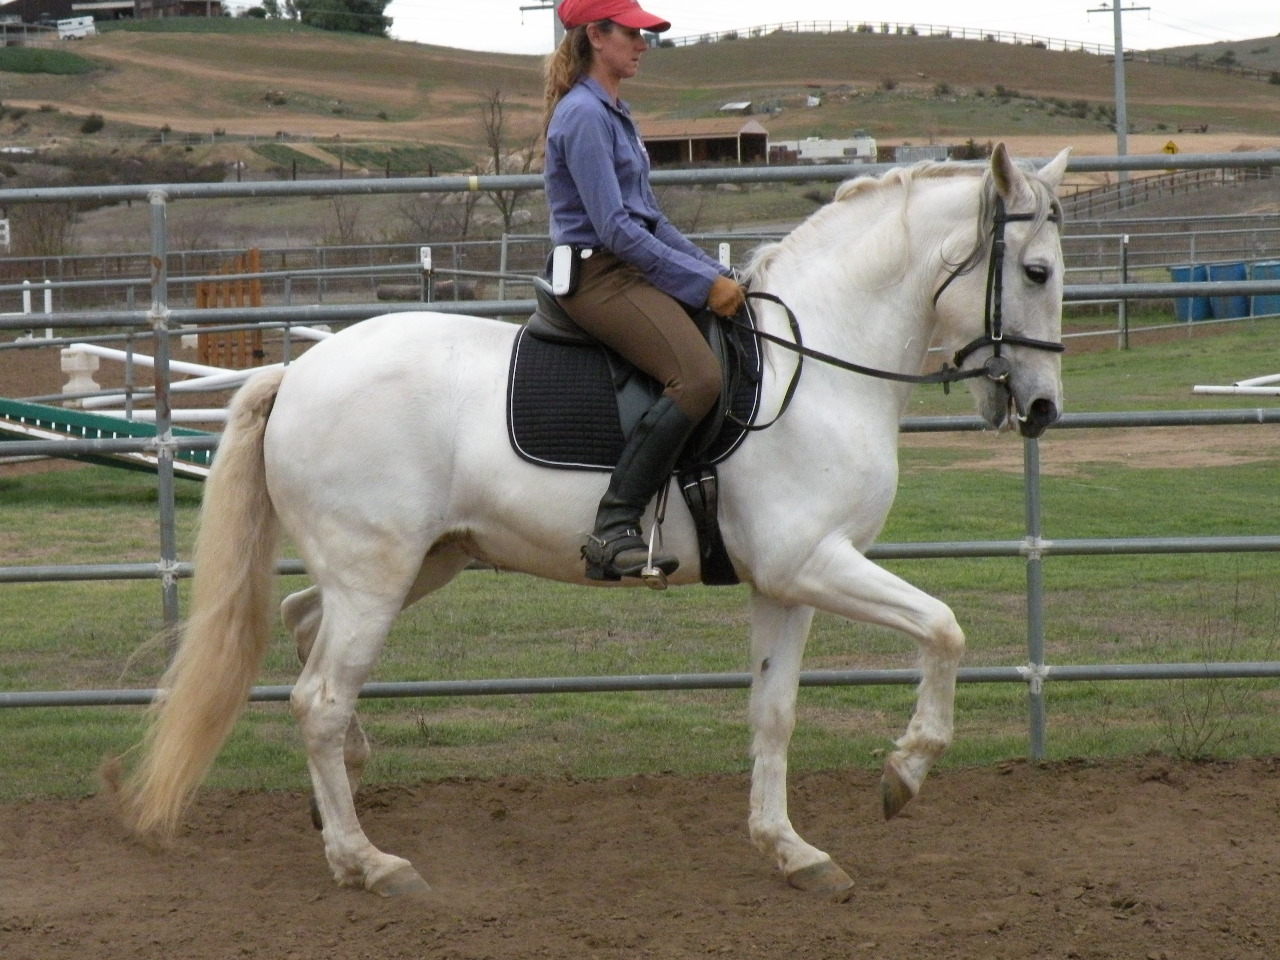 A woman riding on the back of a white horse.